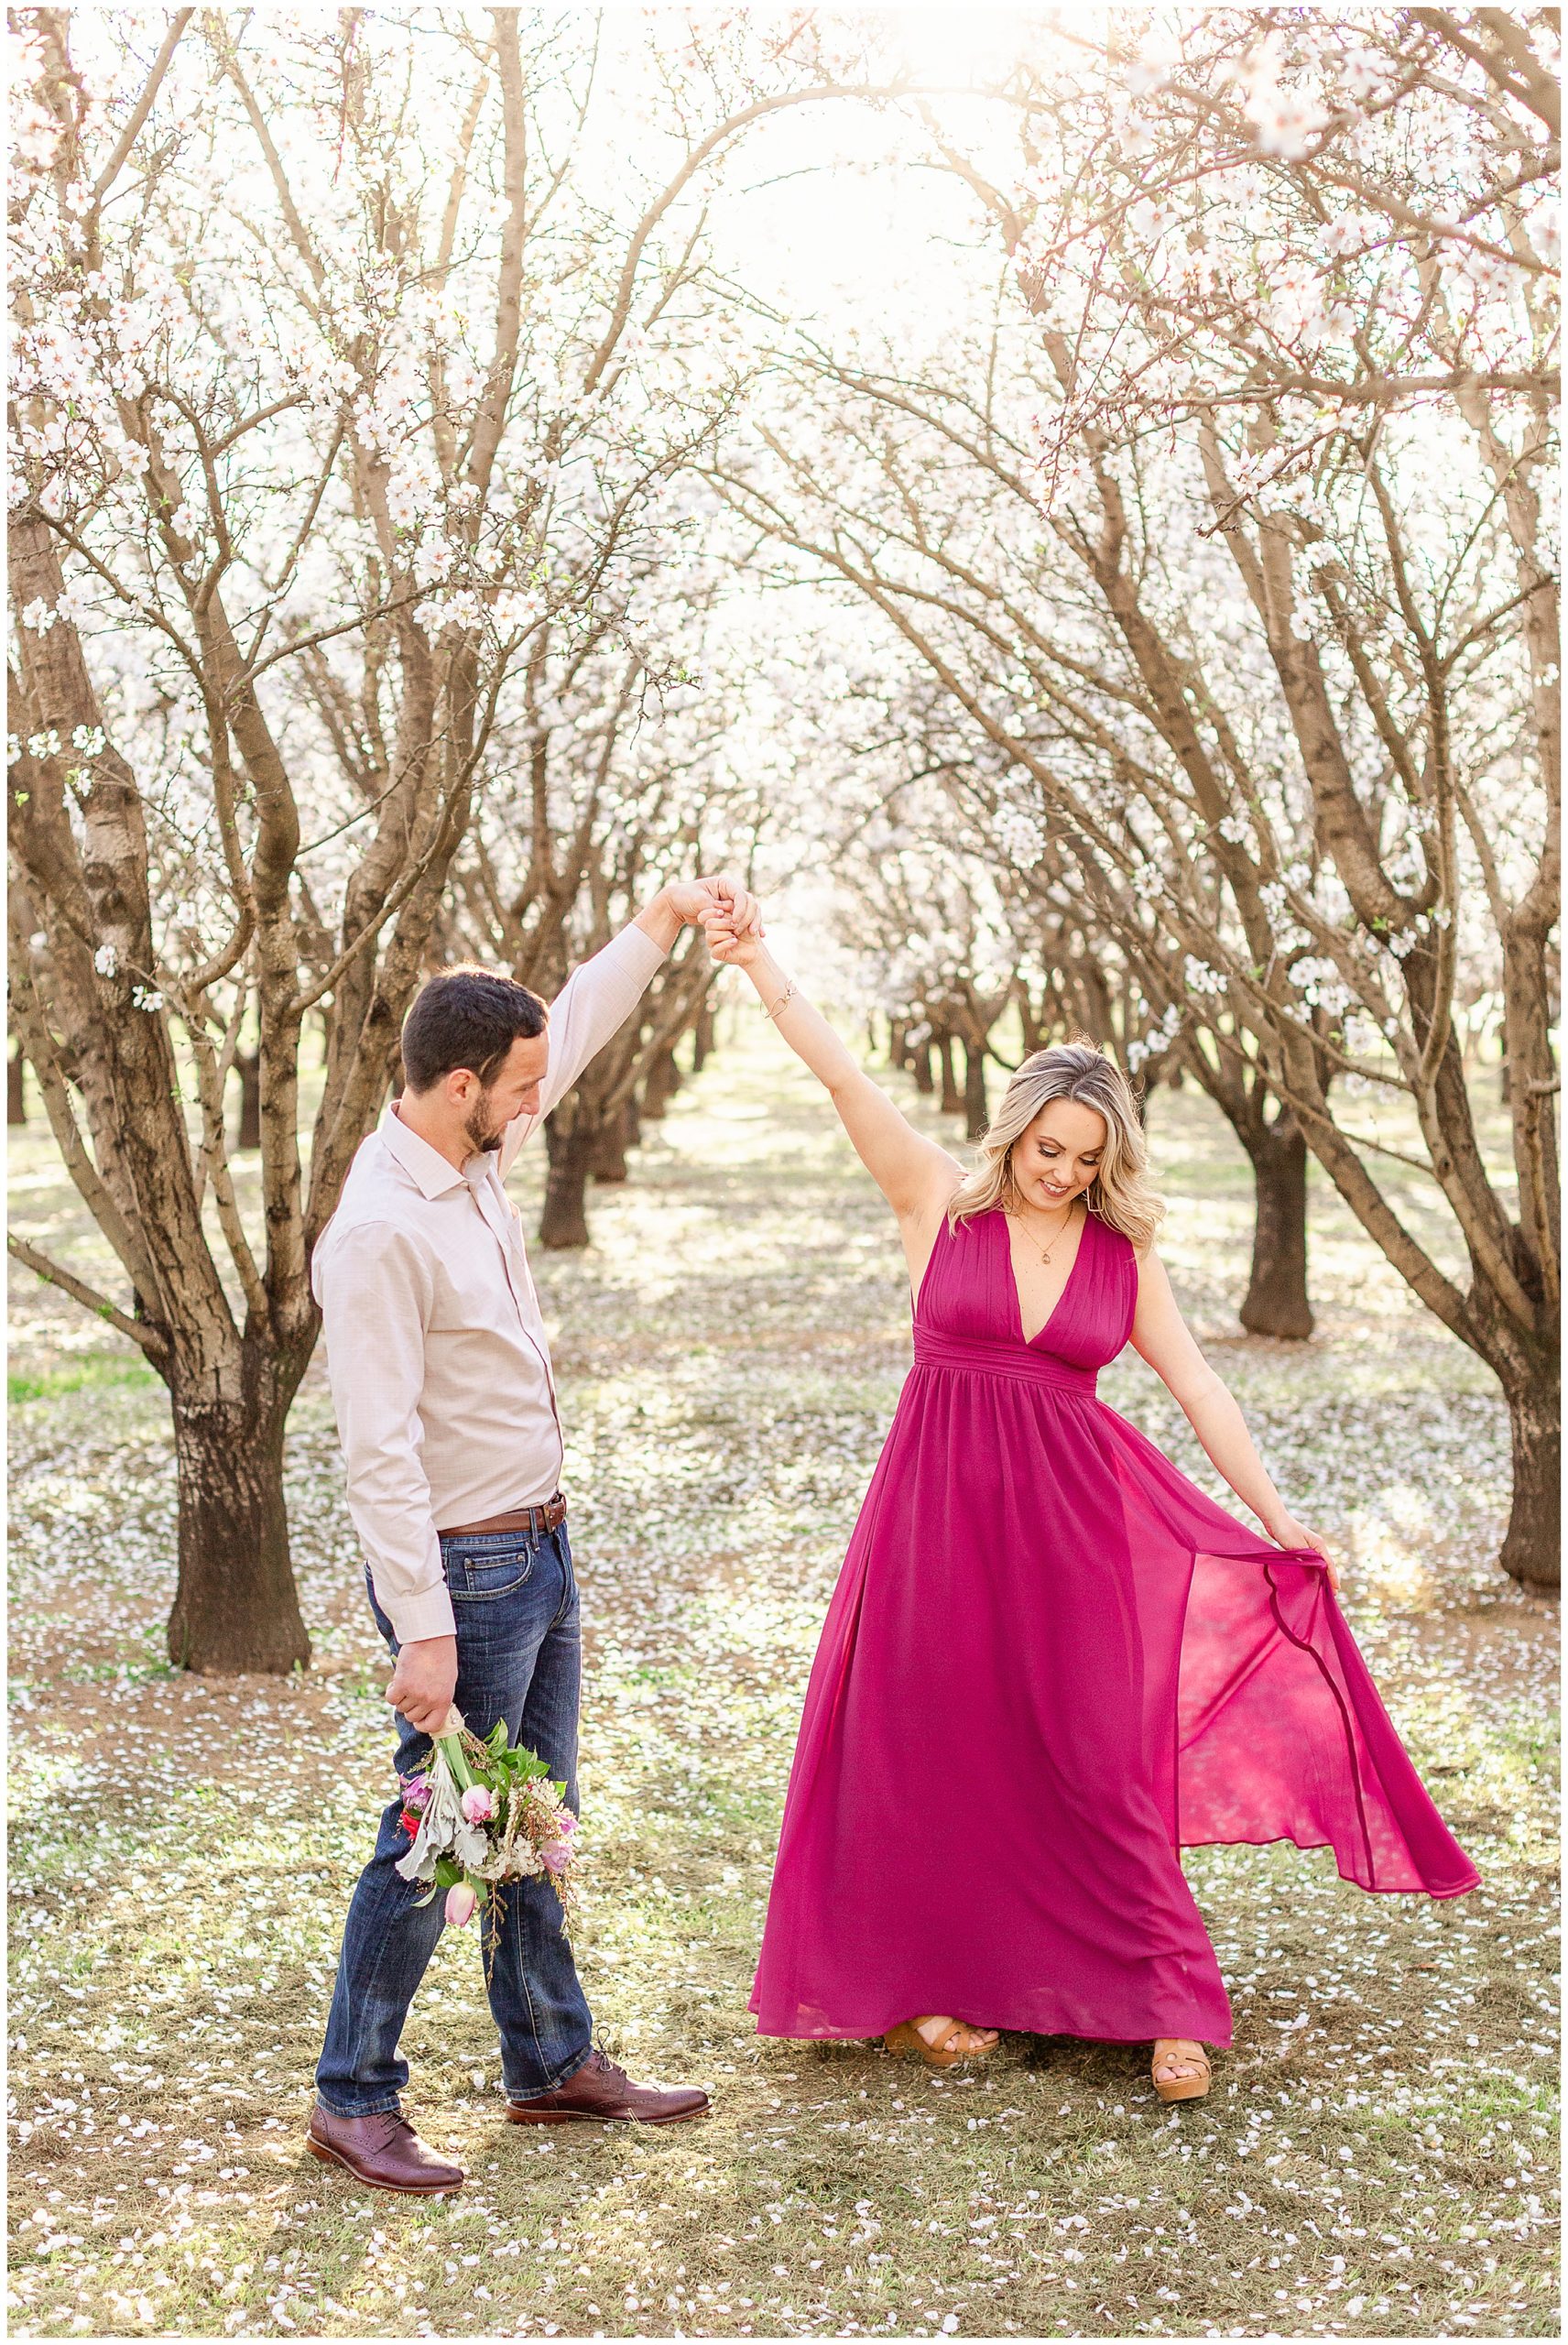 Dancing in the Almond Blossoms | Tara + Jesse